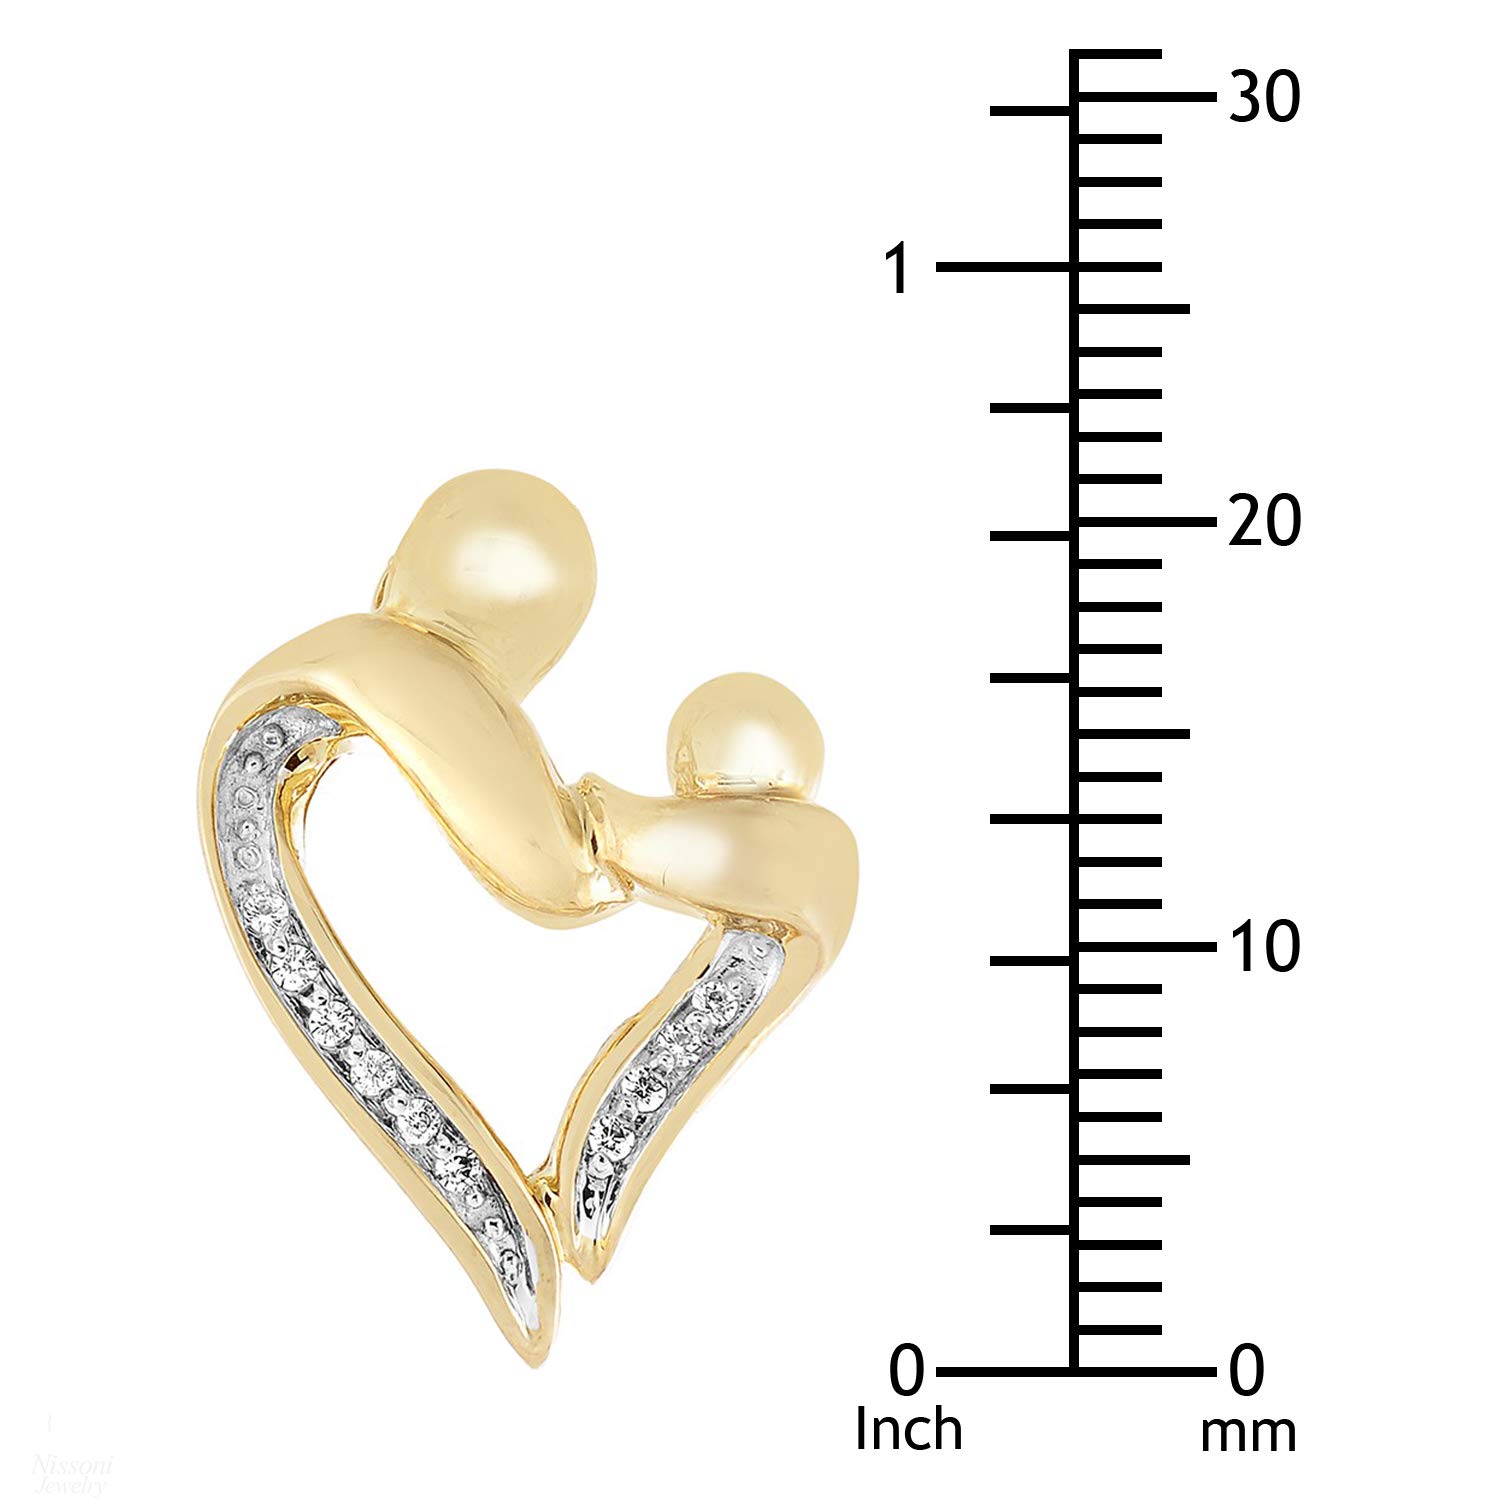 The Diamond Deal Mother and Child/Daugther Diamond Accent Heart Pendant Charm Necklace in 10k SOLID Yellow Gold with 18 inch Chain